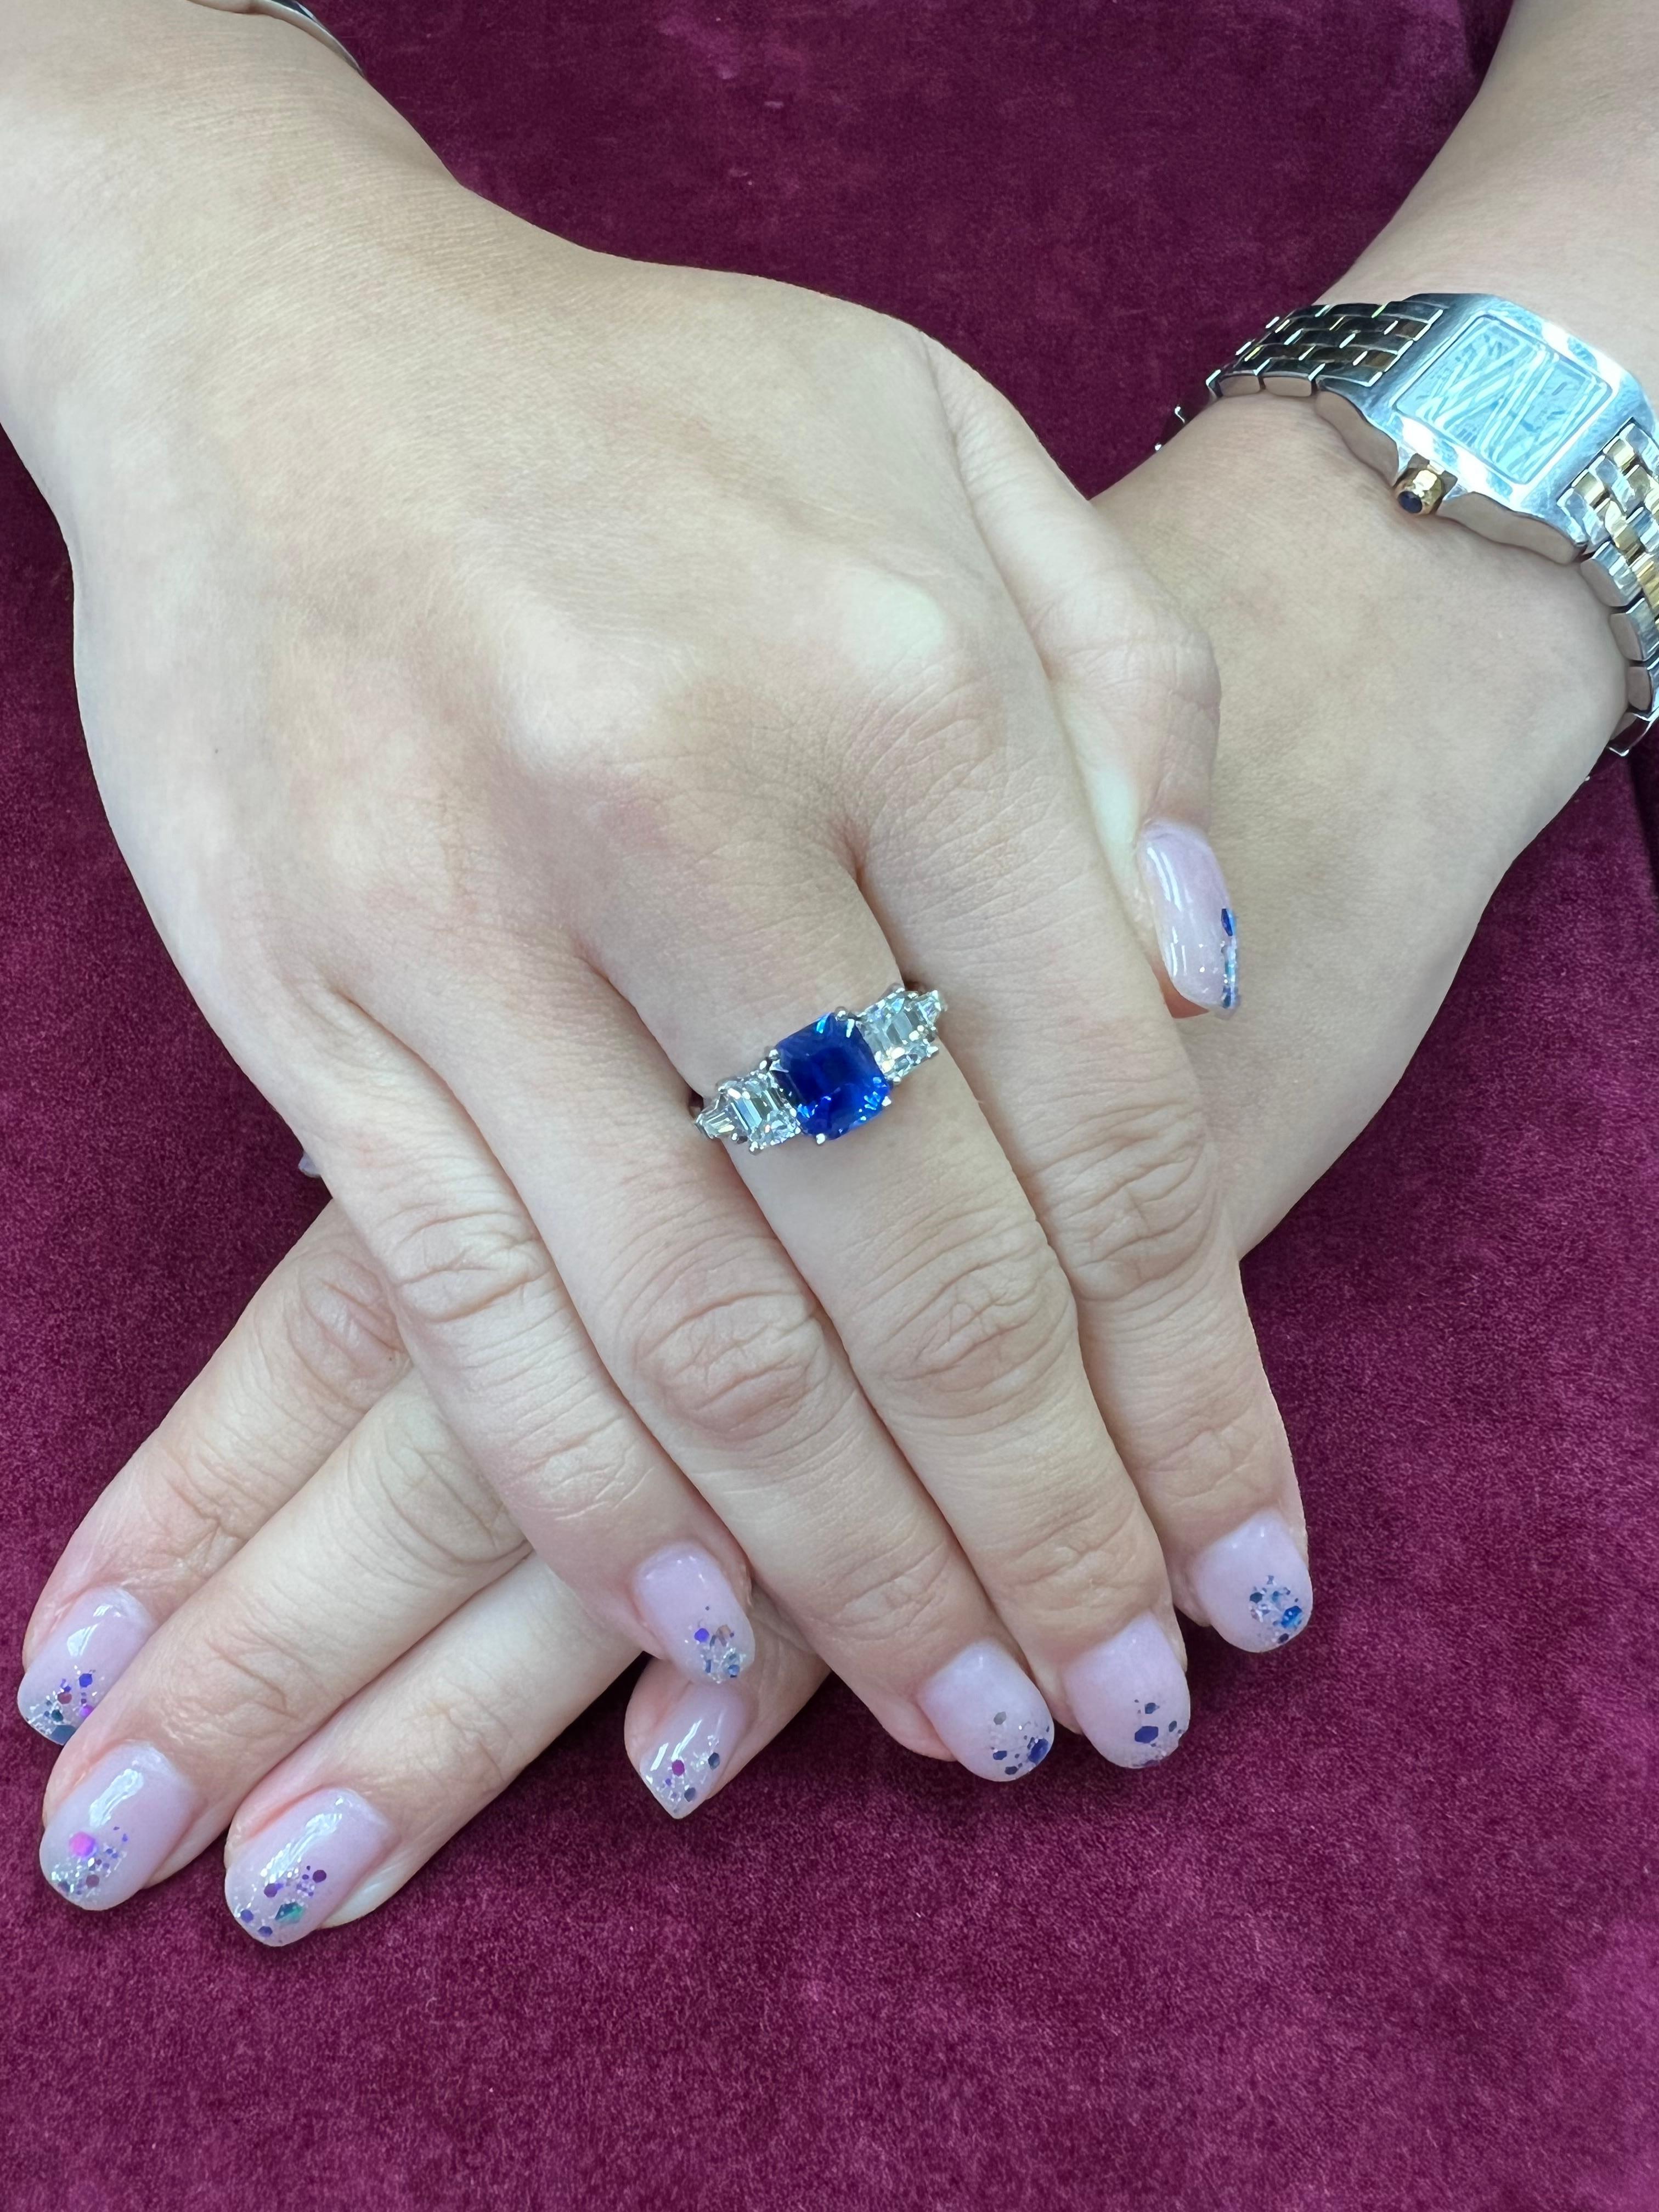 The HD video says it all! It does not get any better than this. Sapphires from the Kashmir region are considered the KING. They are the finest and most desirable sapphires in the world. The octagonal step cut Kashmir sapphire weights 1.96cts with a